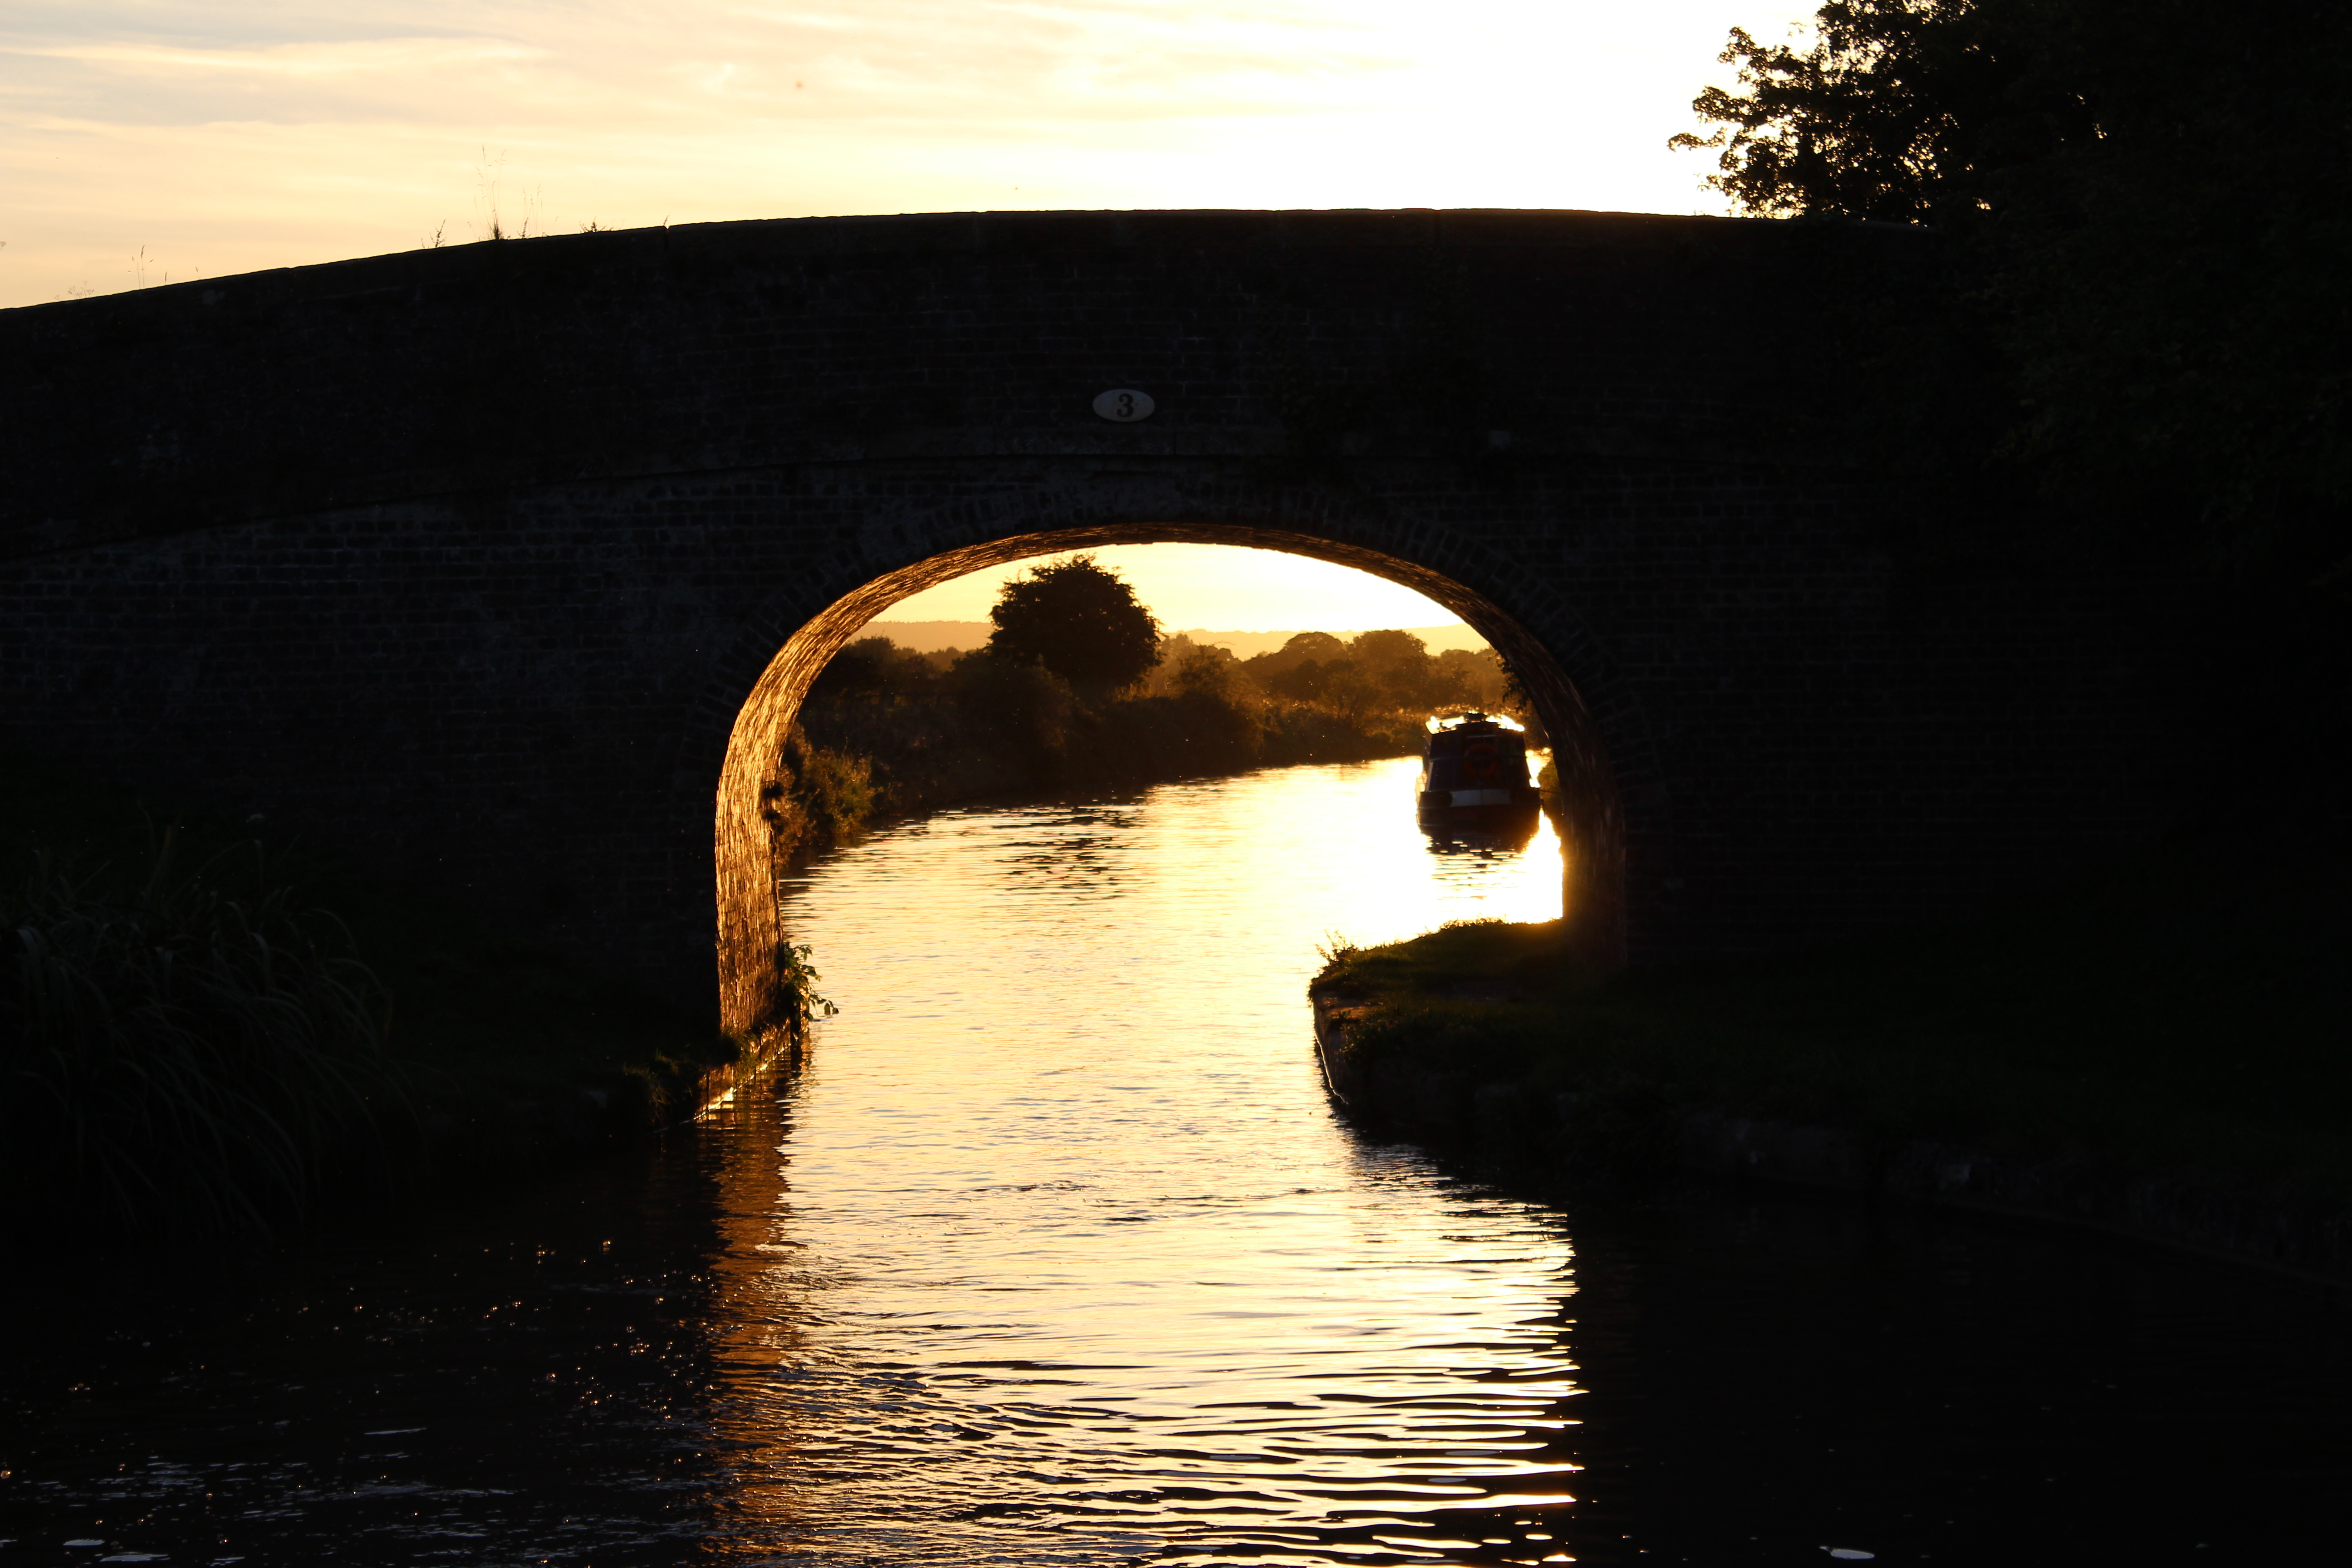 The setting sun behind a classic Middlewich Branch Bridge